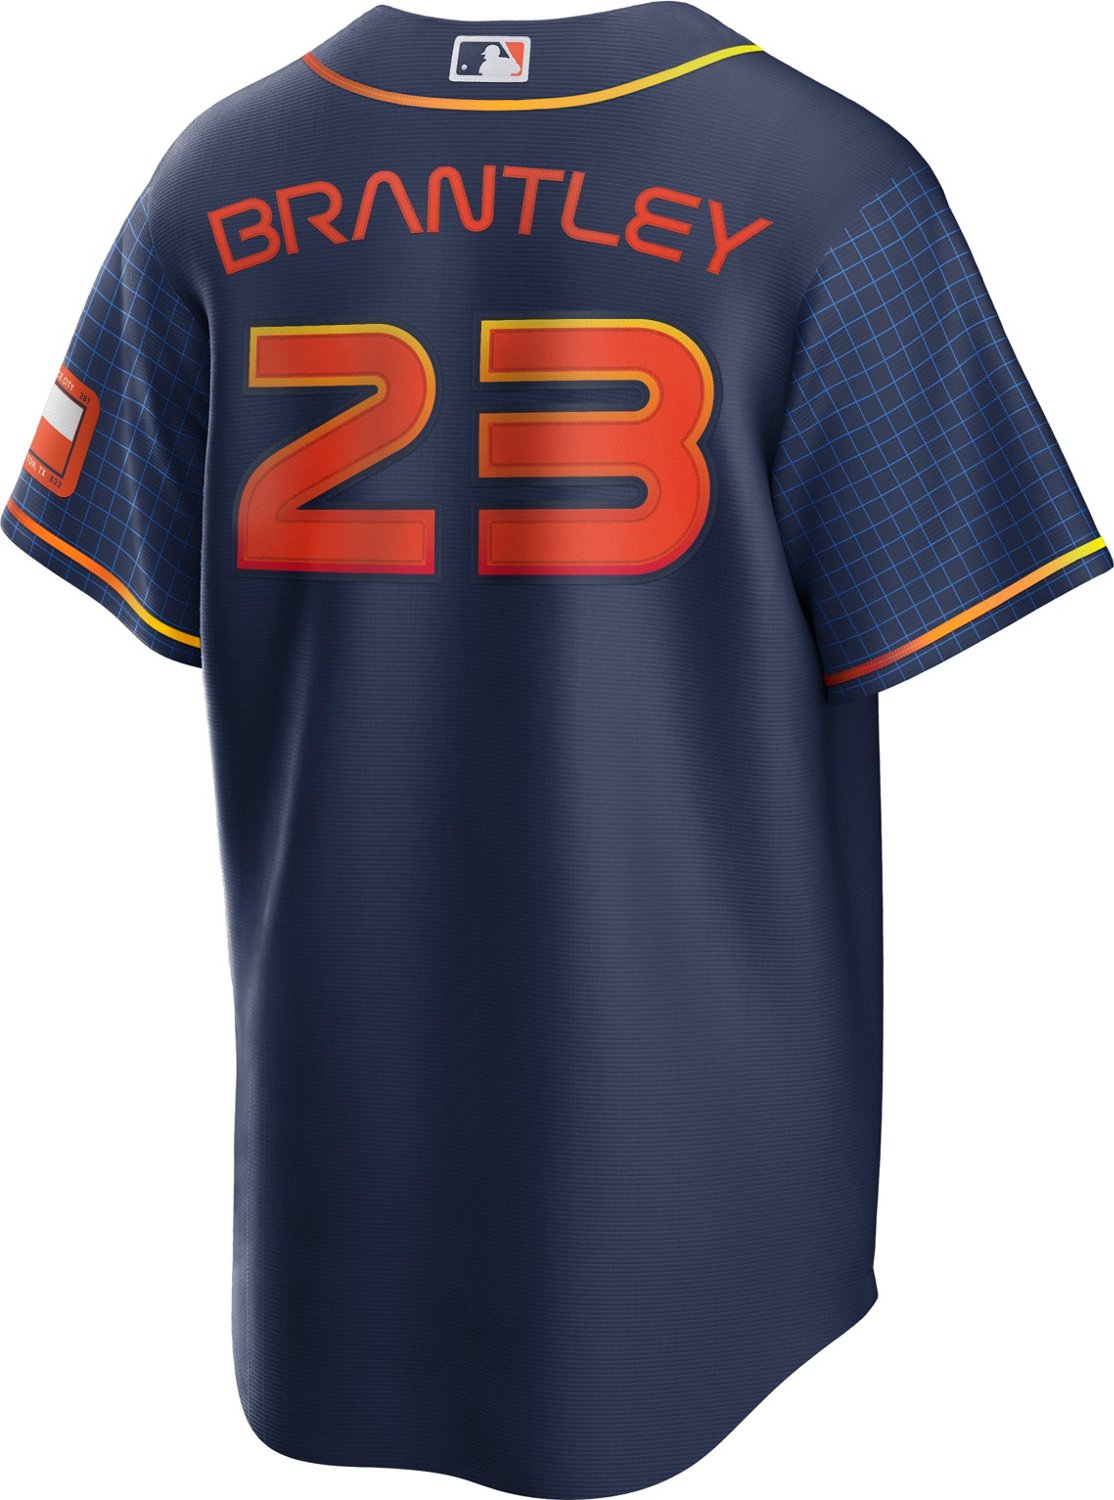 michael brantley youth jersey